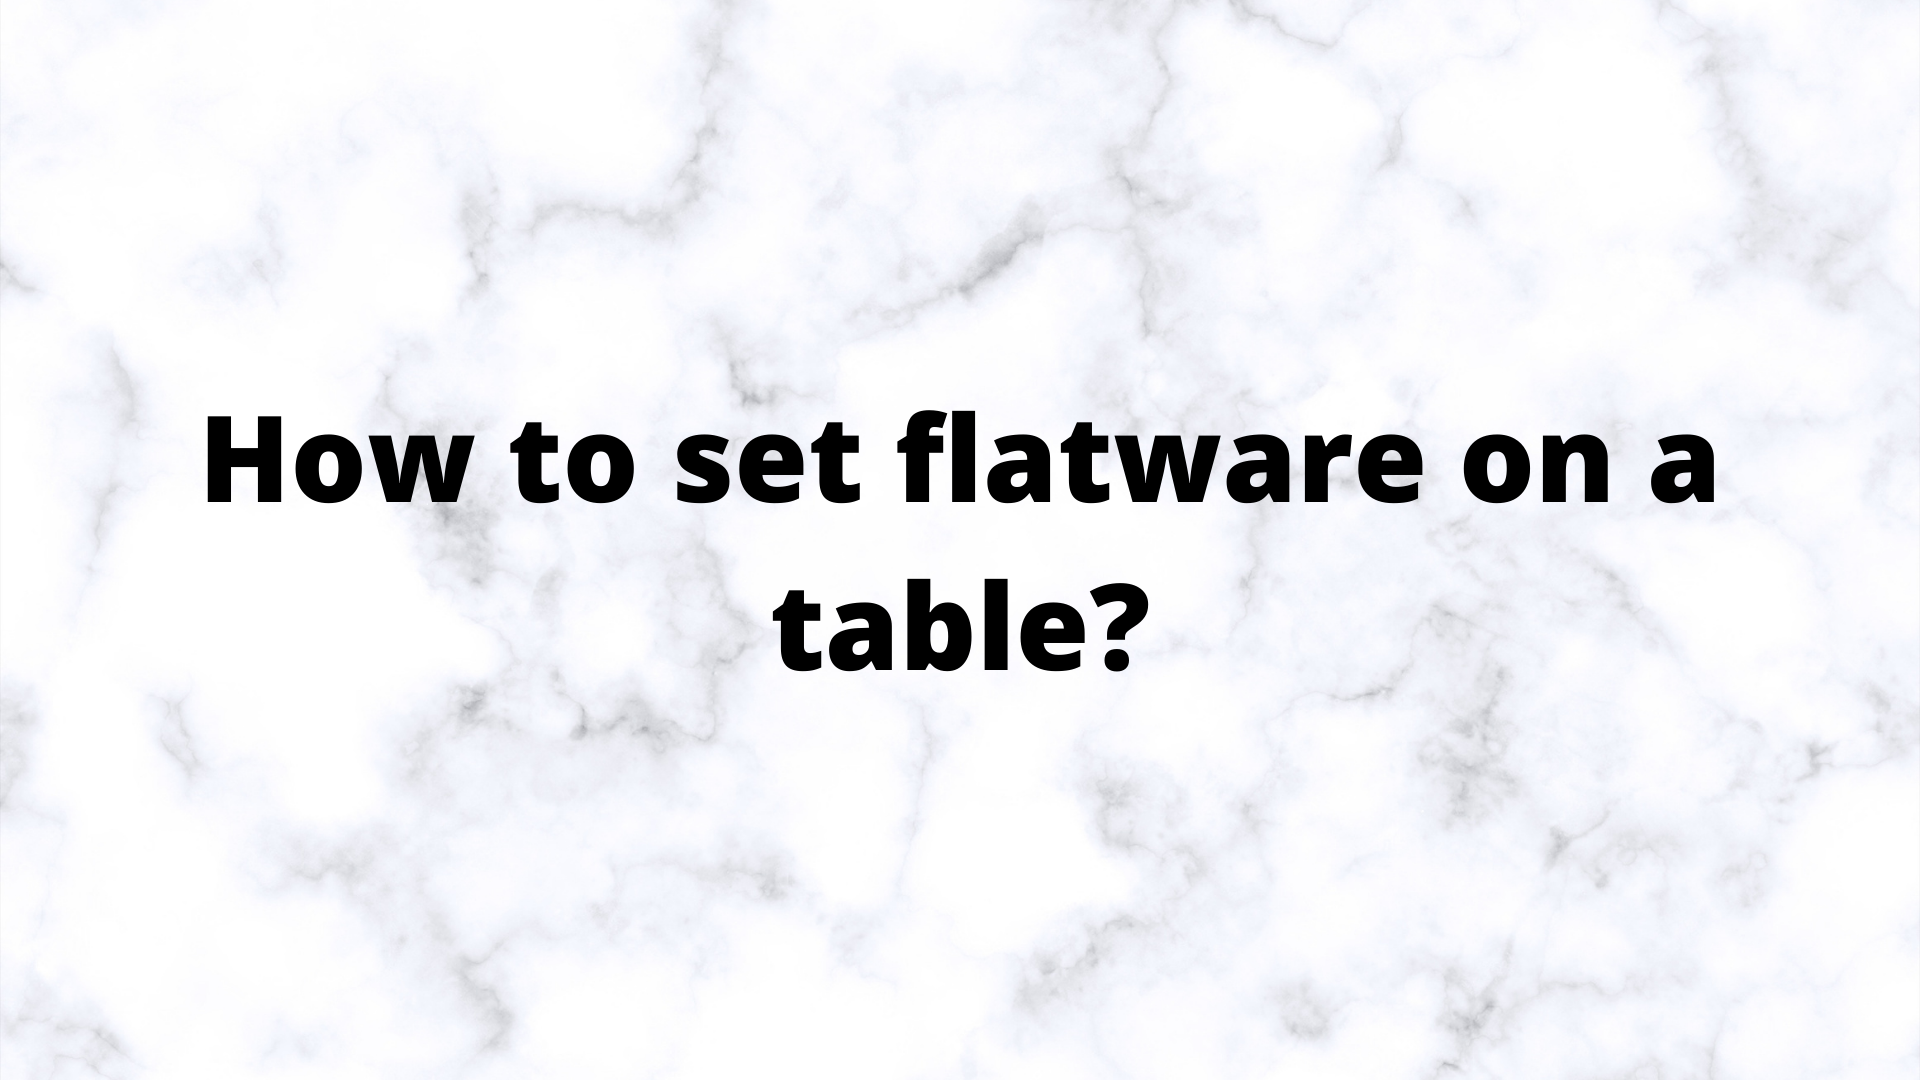 How do you set flatware on a table?